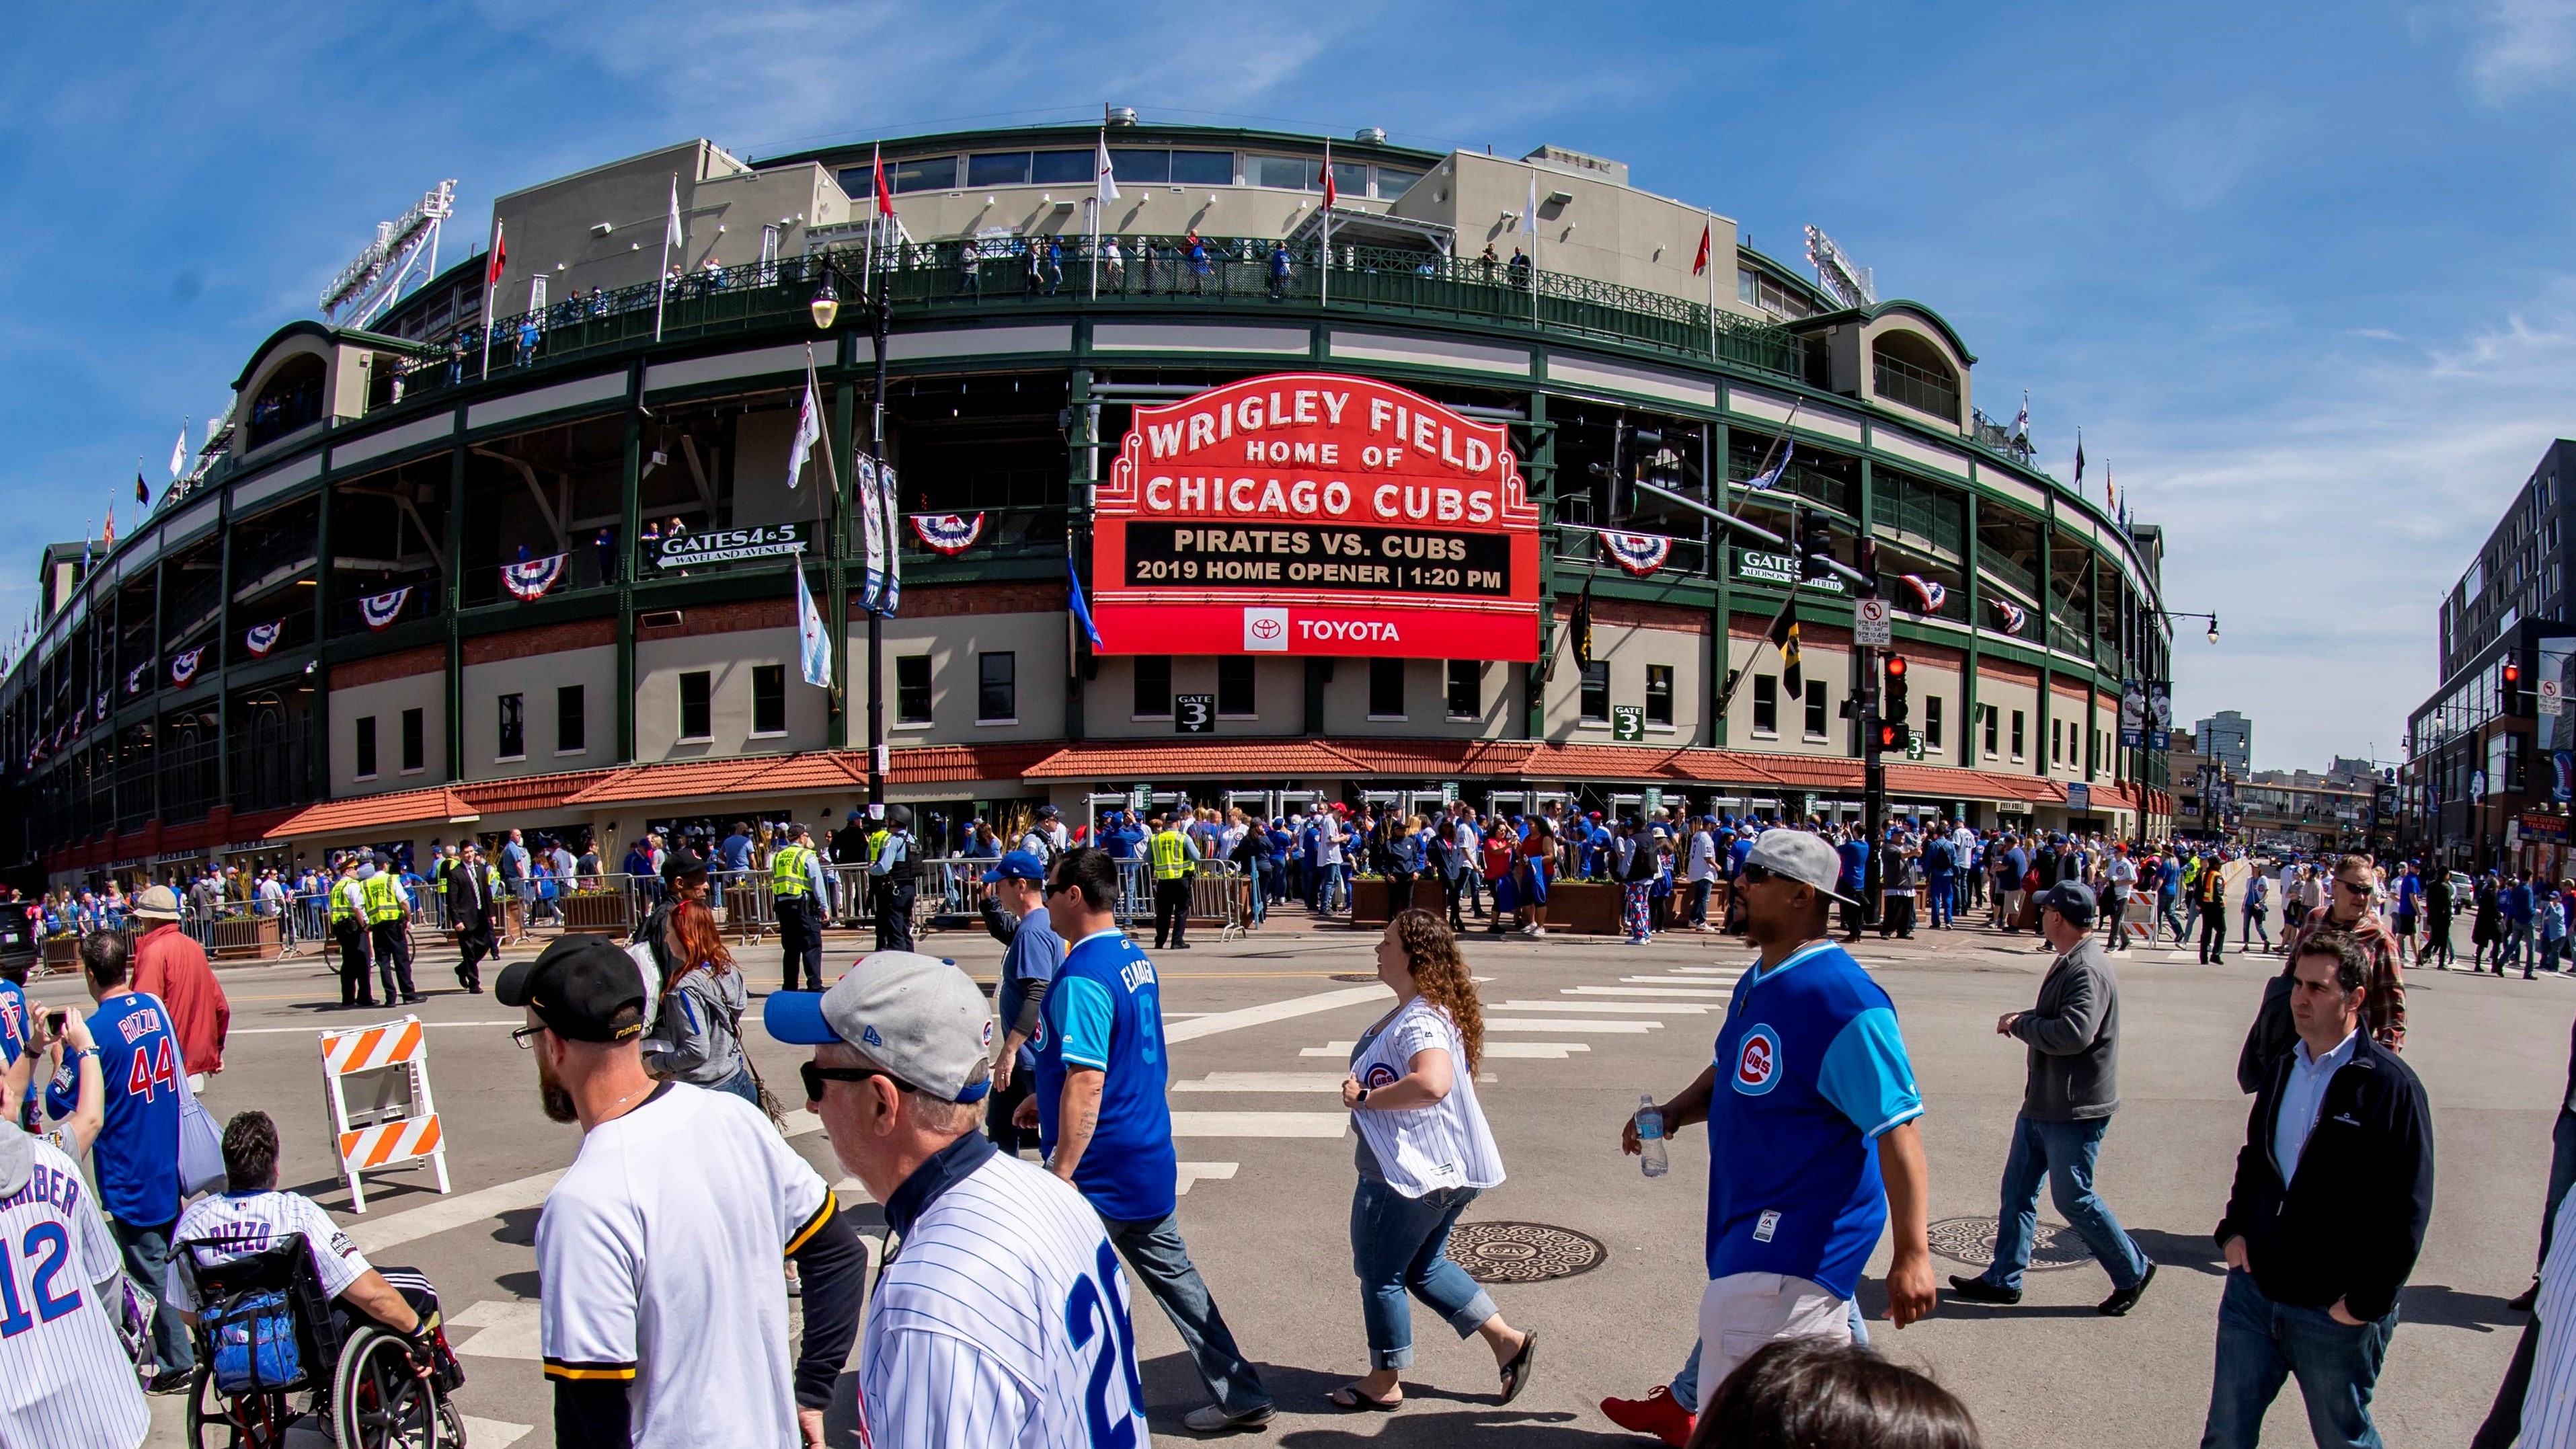 Chicago Cubs - Wrigley Field has been designated as a